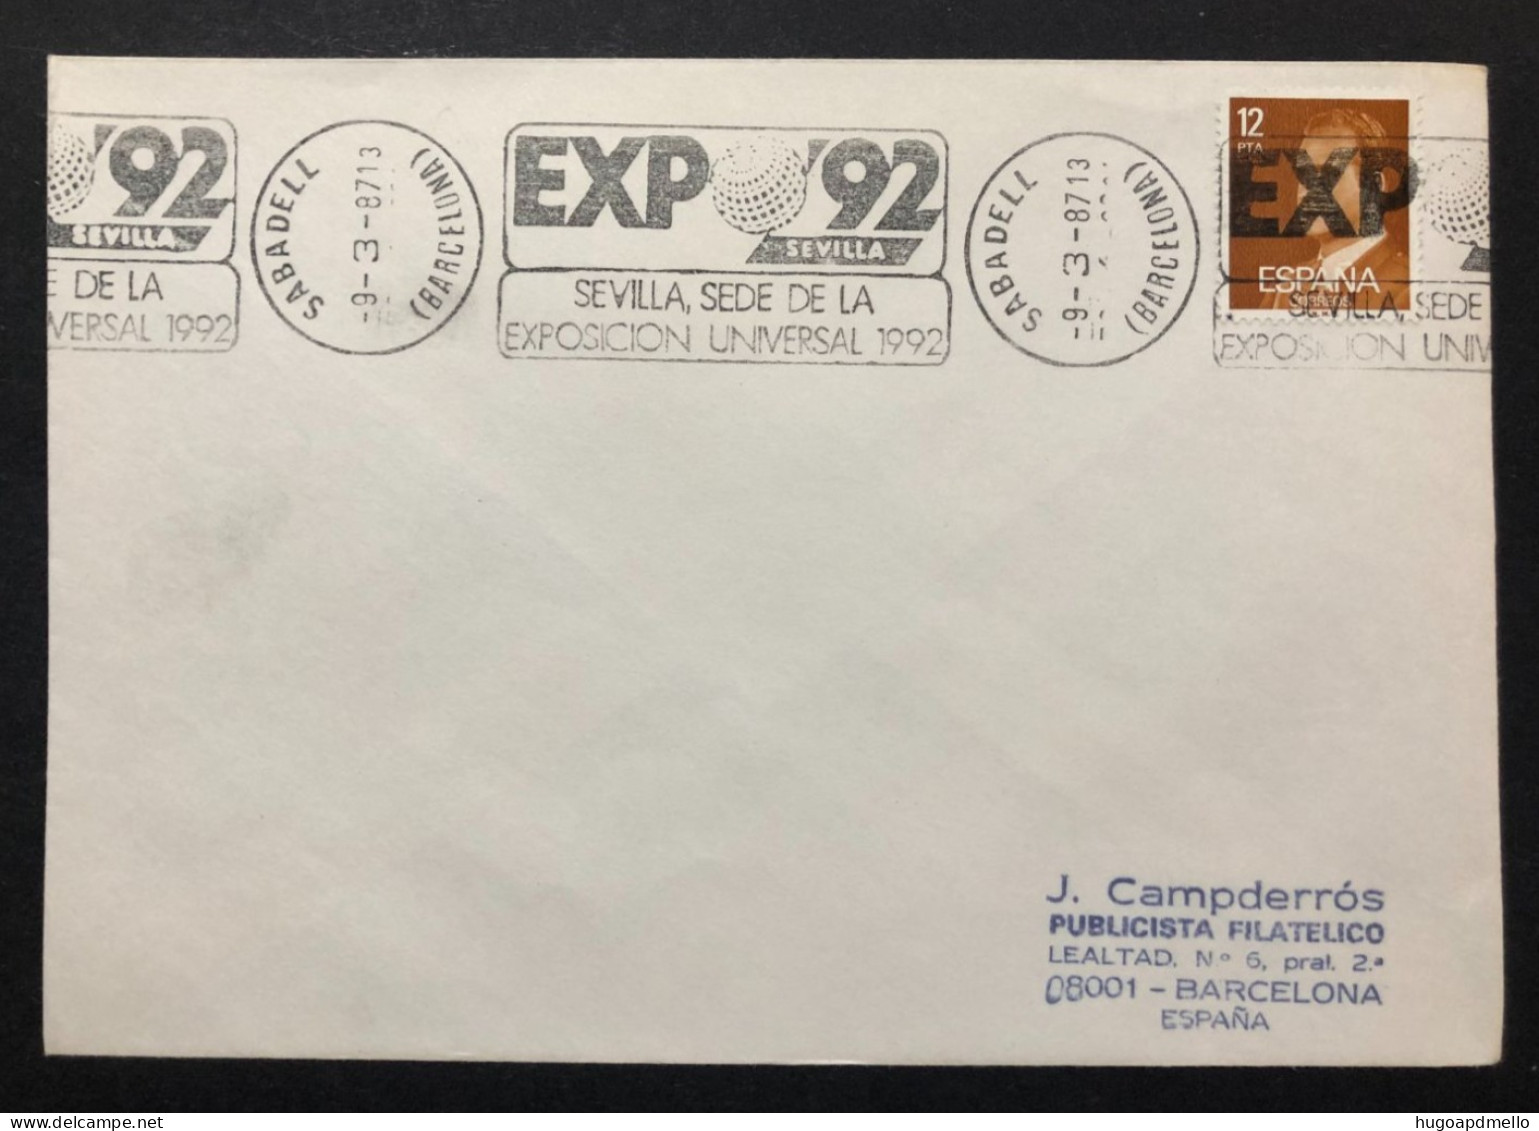 SPAIN, Cover With Special Cancellation « EXPO '92 », « SABADELL (Barcelona) Postmark », 1987 - 1992 – Séville (Espagne)